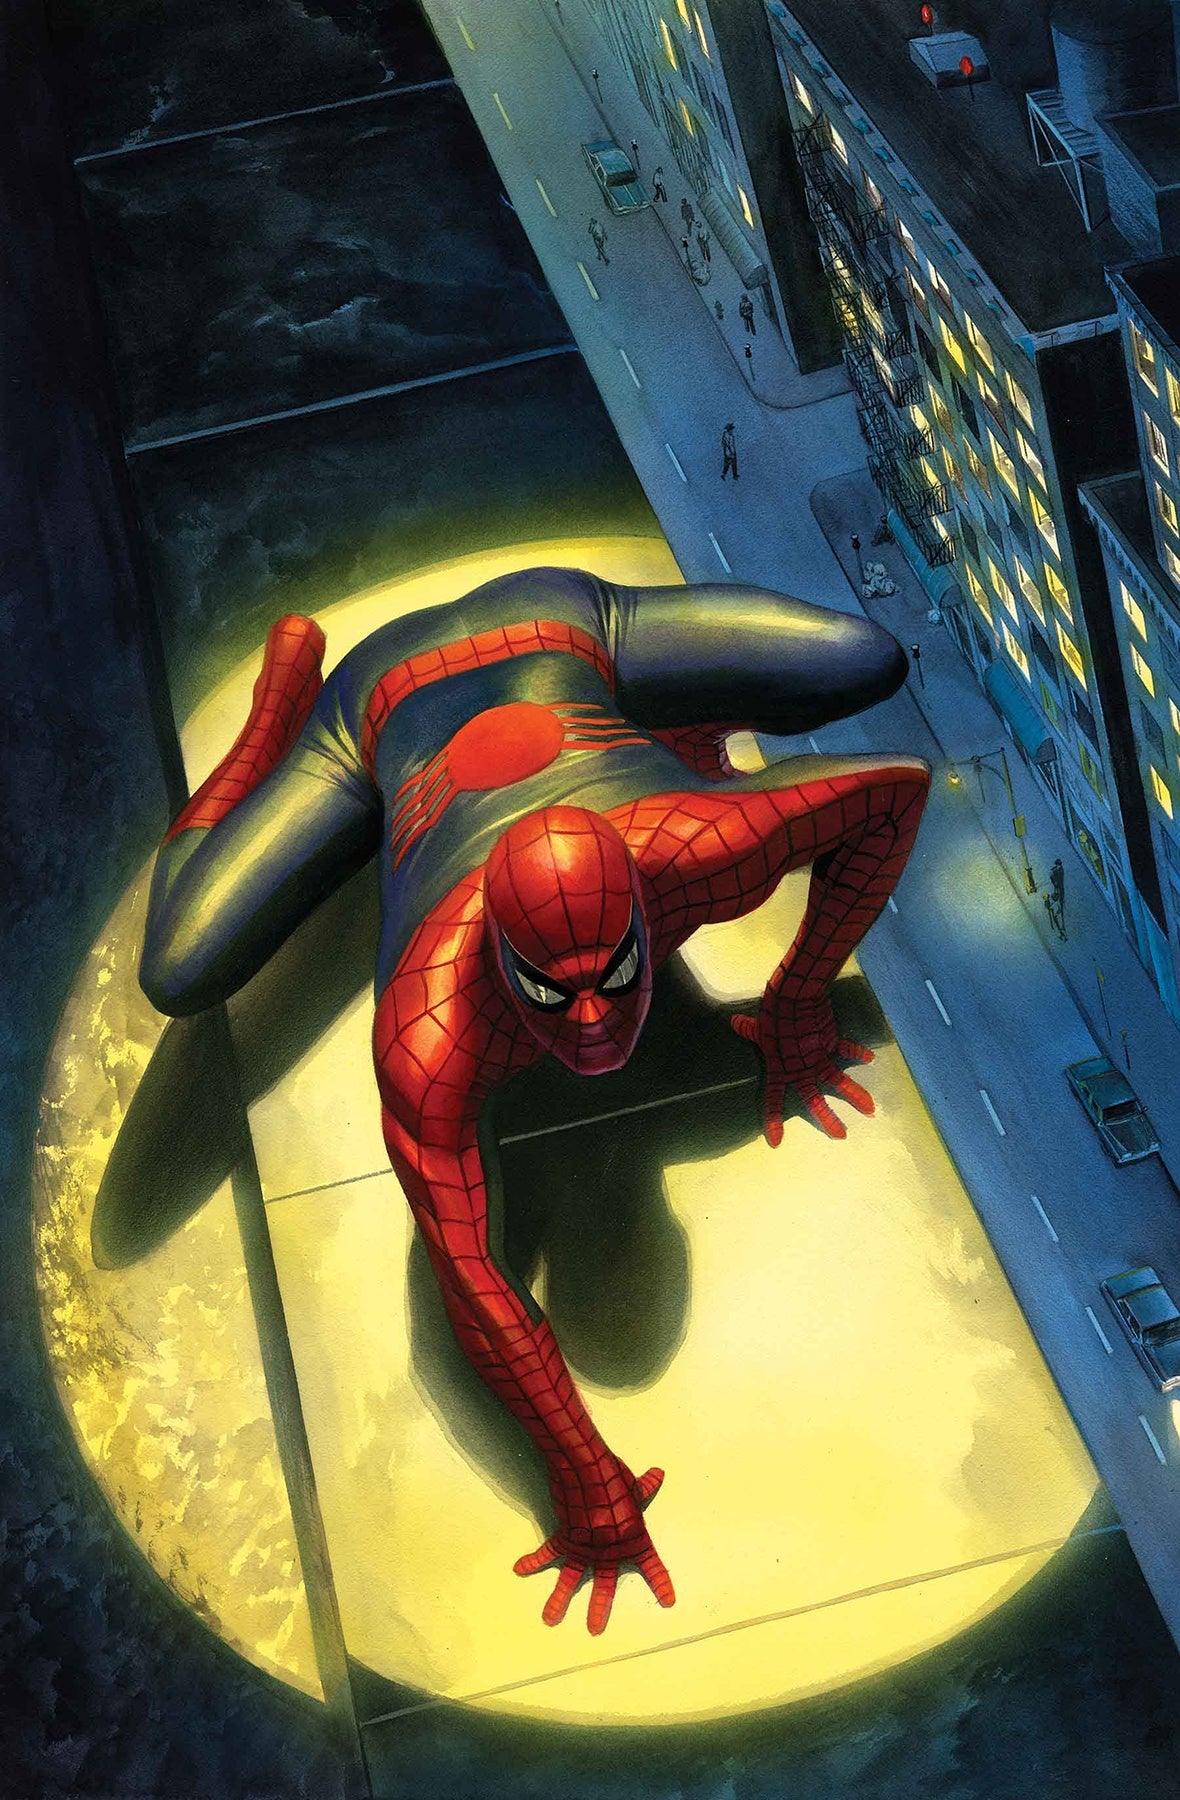 Spectacular Spider-Man Alex Ross SIGNED Limited Edition Giclee Print on Canvas